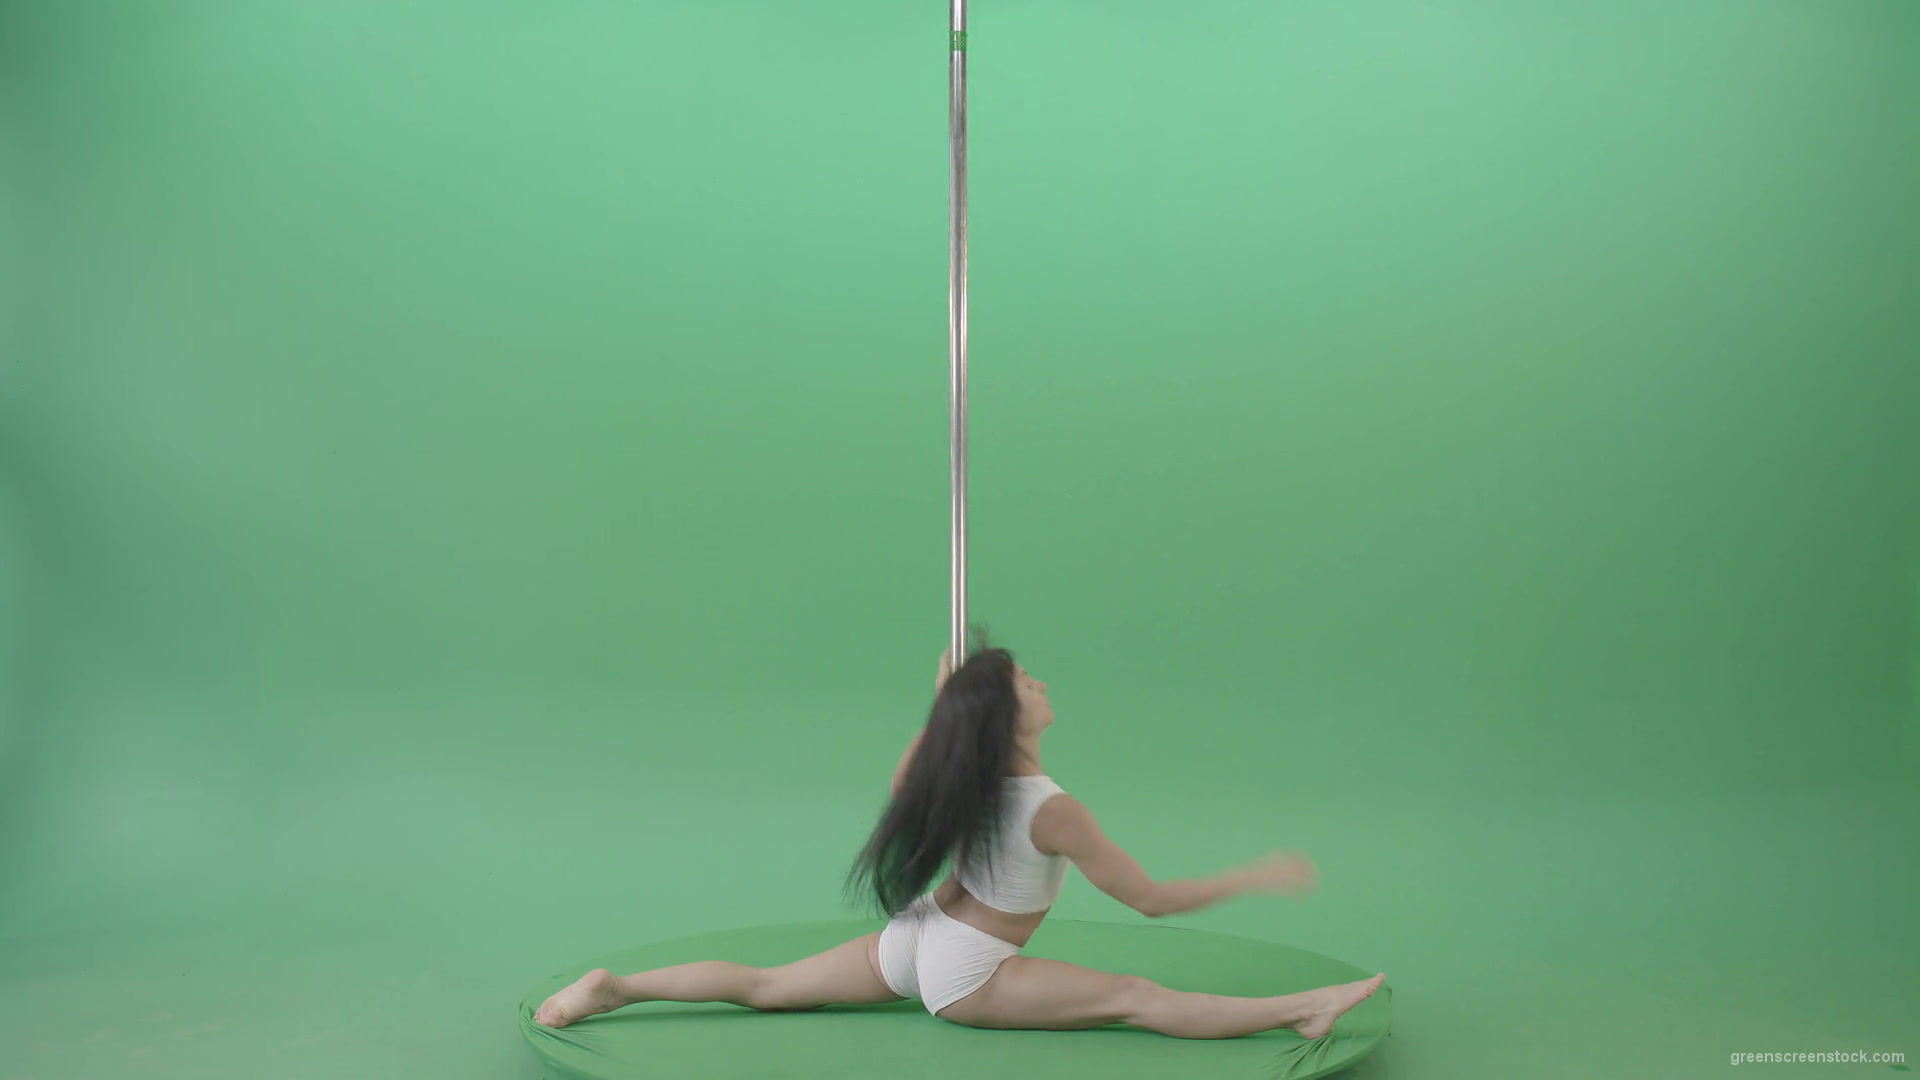 Go-Go-Girl-in-white-dress-spinning-on-the-pole-and-sit-on-a-twine-on-green-screen-4K-Video-Footage-1920_008 Green Screen Stock